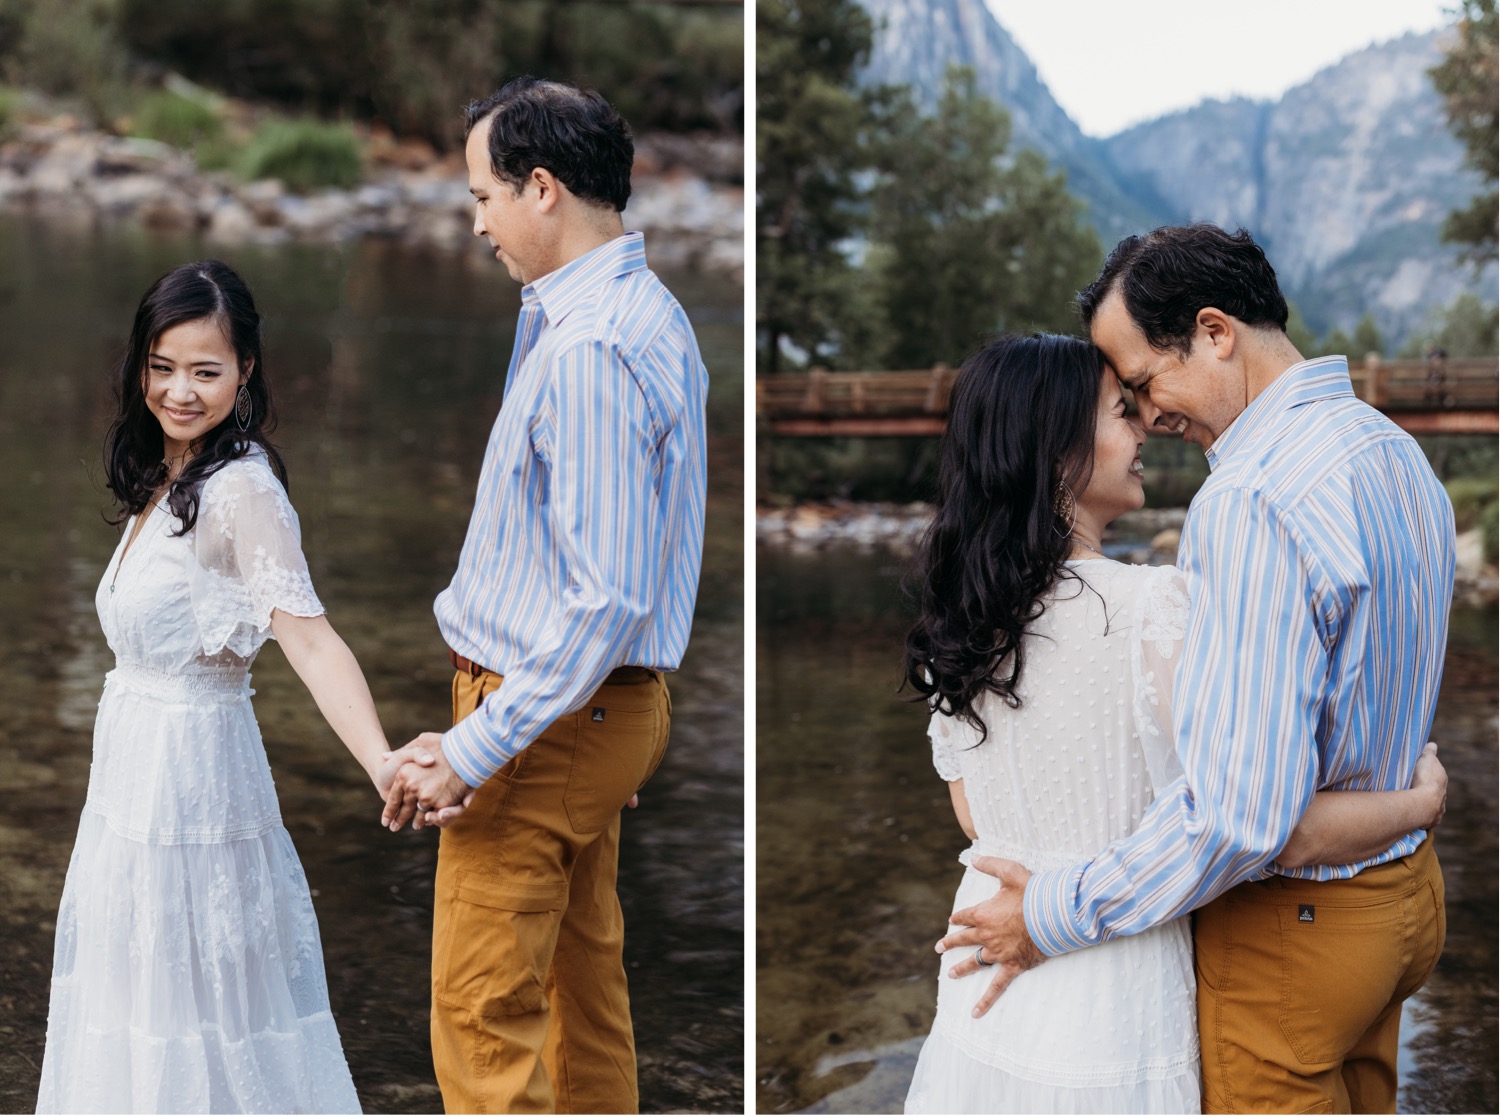 Two images of a cute couple standing together beside a lake in Yosemite National Park.